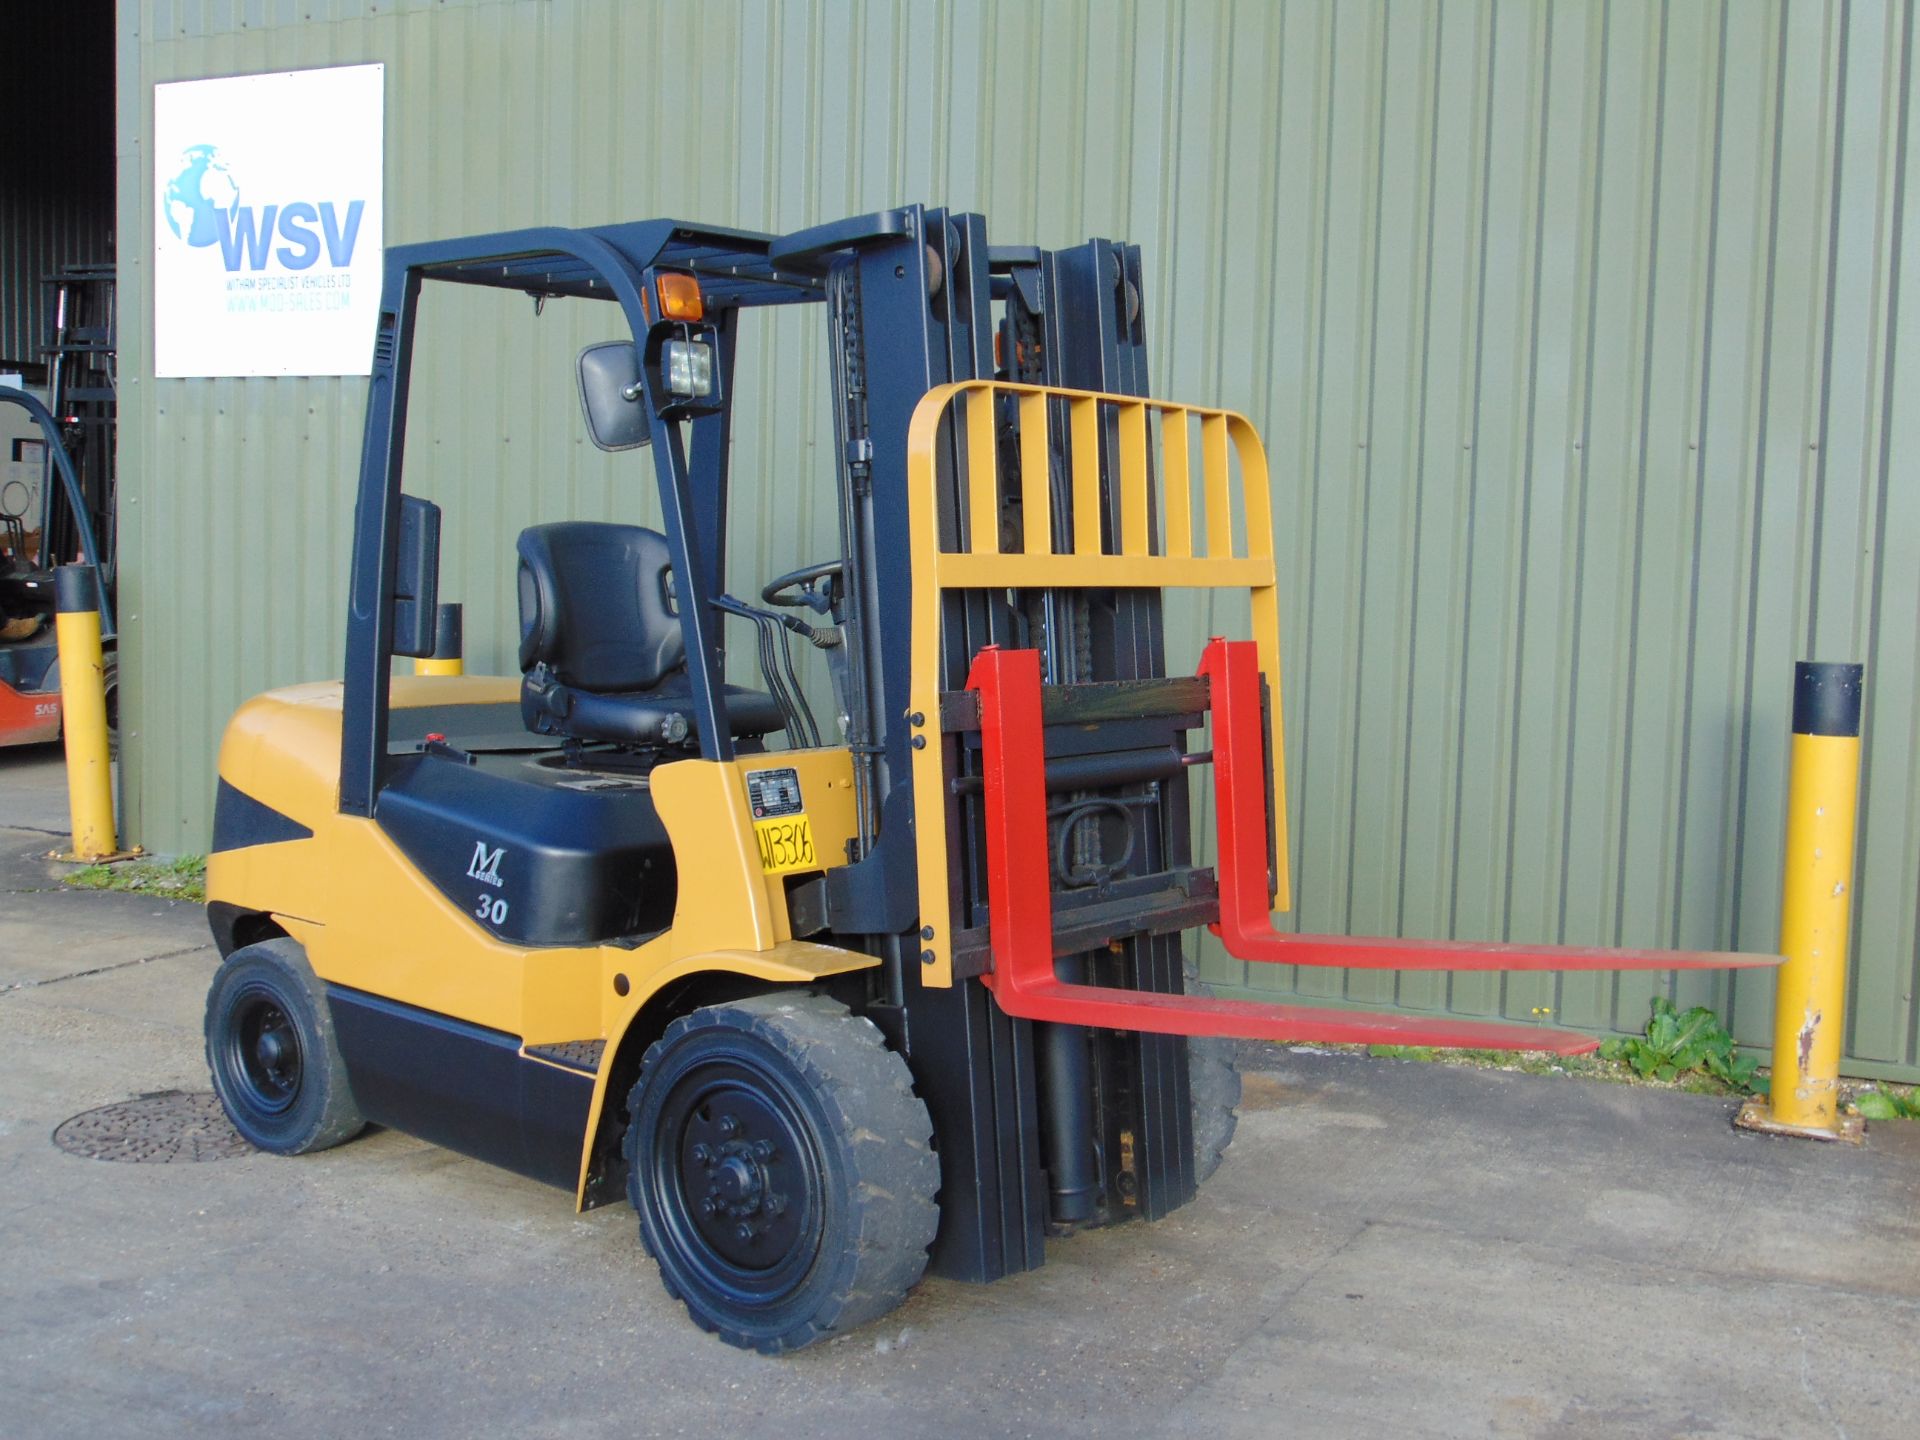 Maximal M30 2500Kg Diesel Fork Lift Truck ONLY 1,876 HOURS! - Image 9 of 26